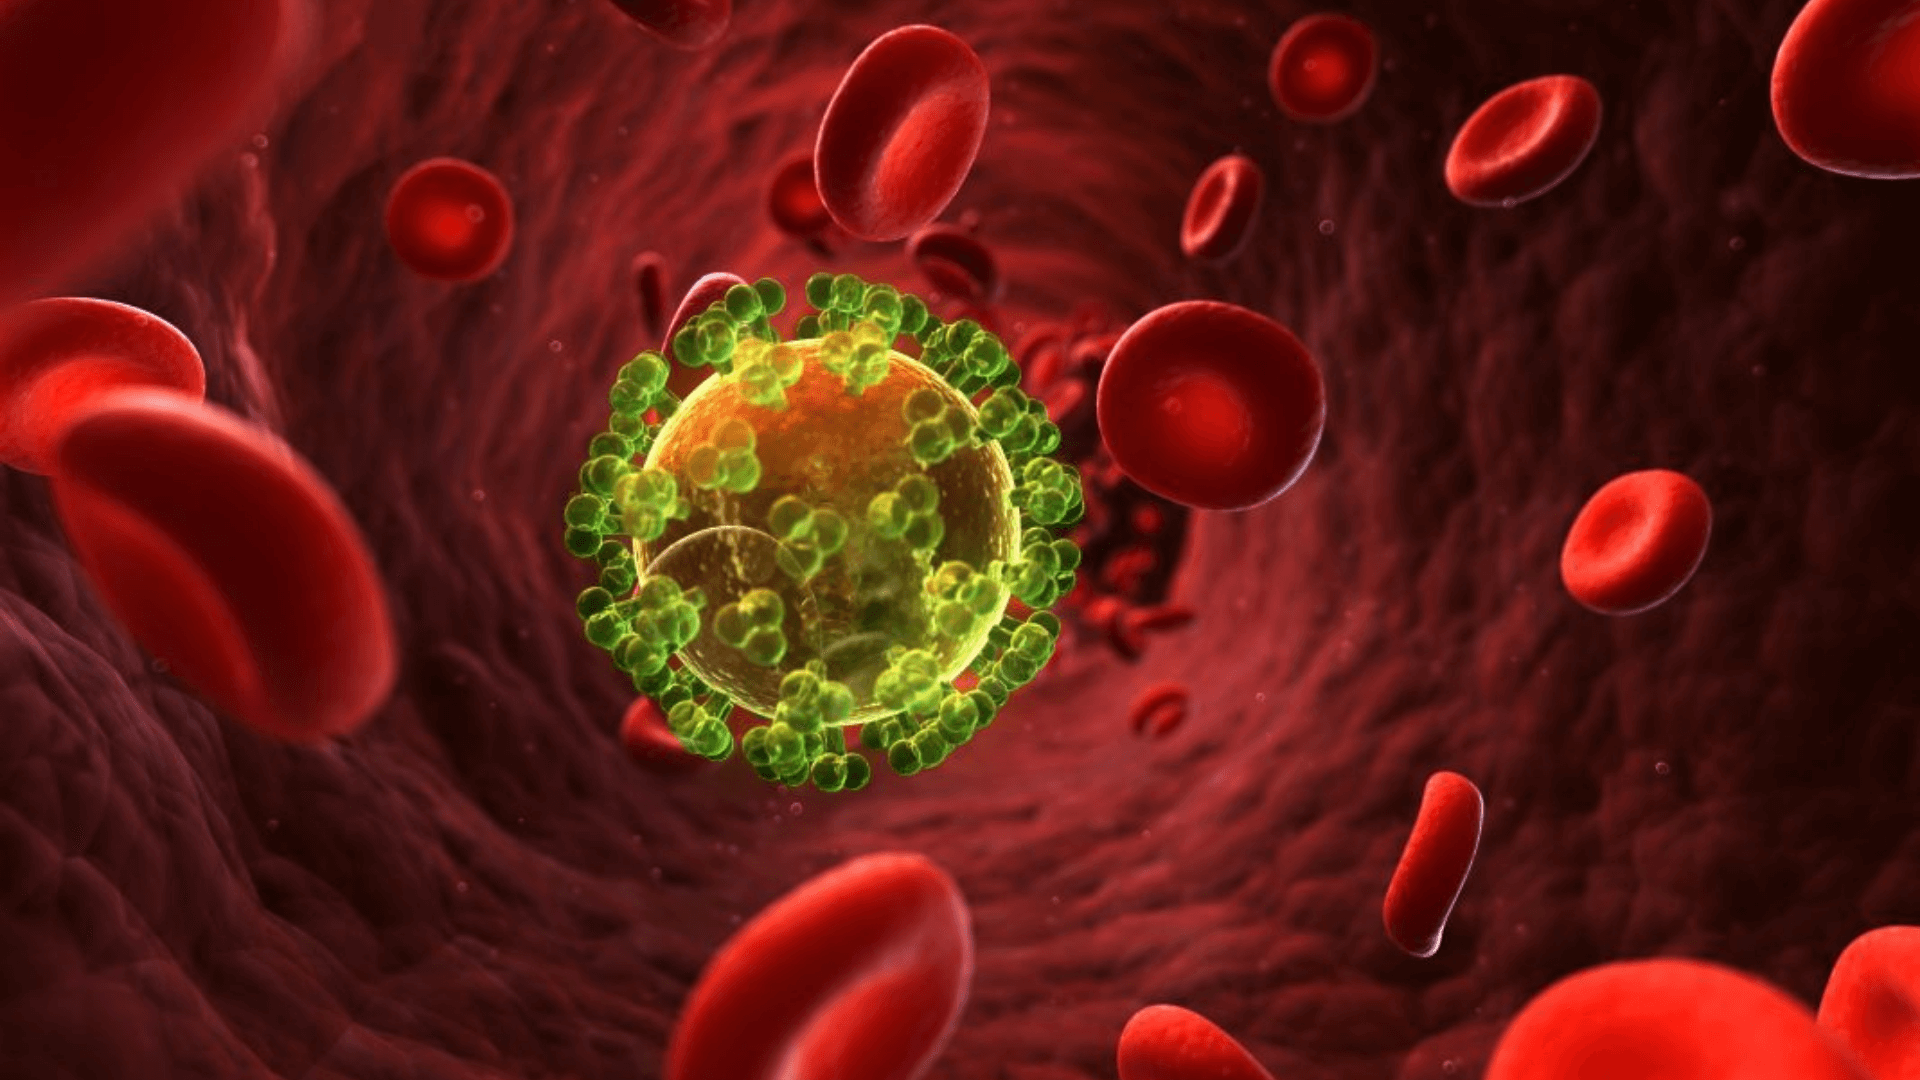 Sugar-Molecule-On-HIV-Infected-Cells-Plays-A-Role-In-Immune-System-1